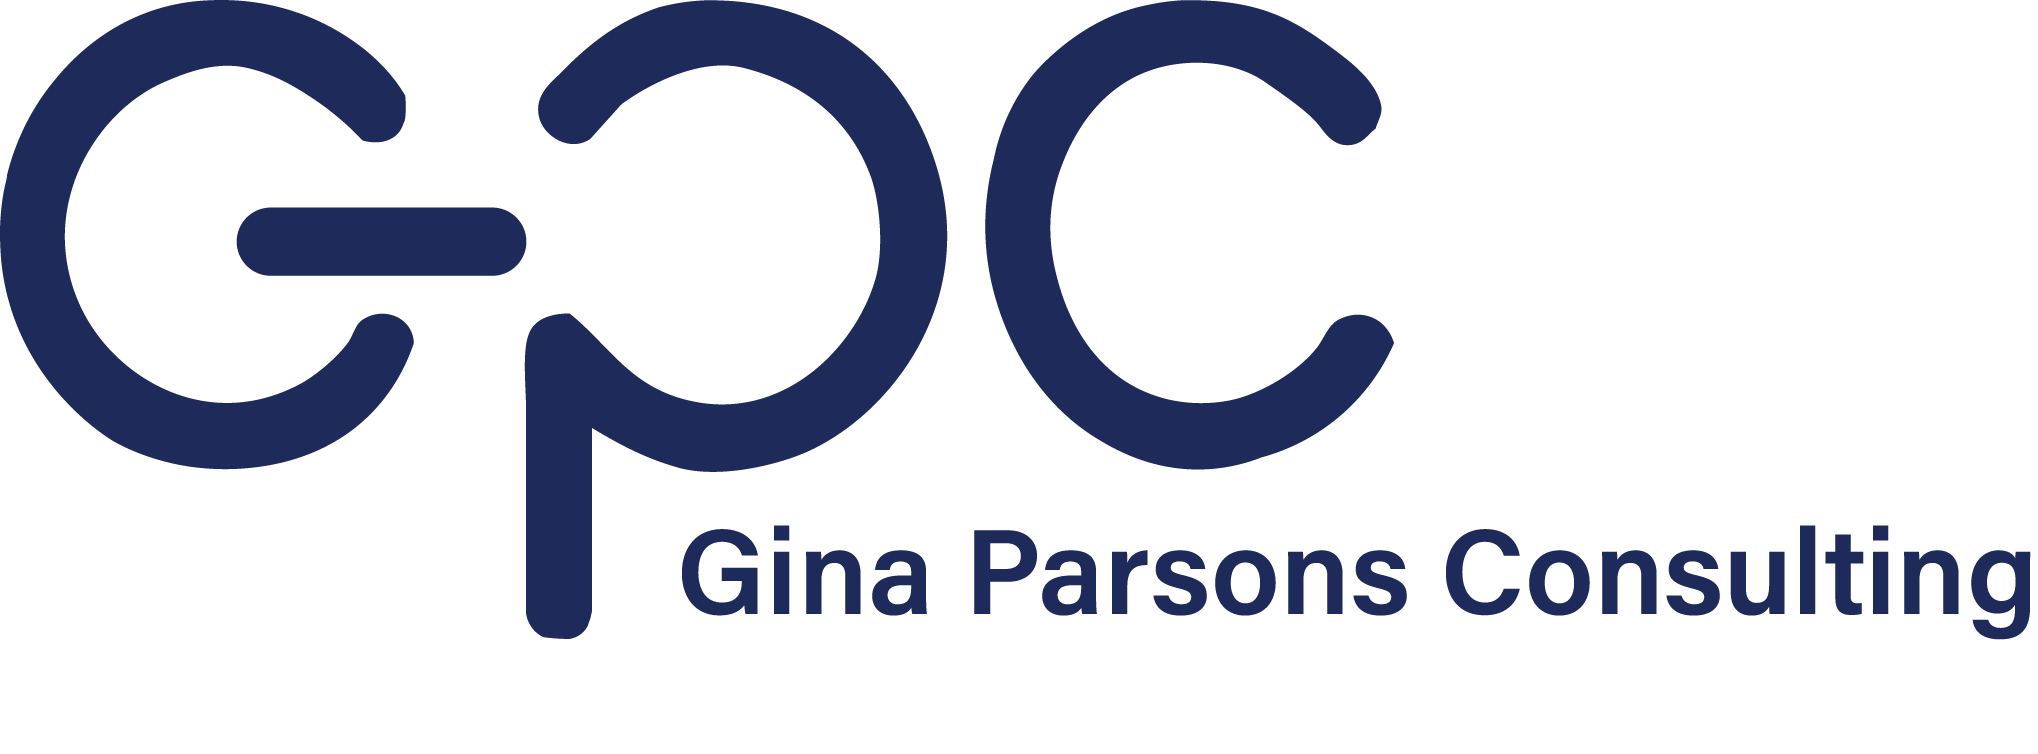 Gina Parsons Consulting